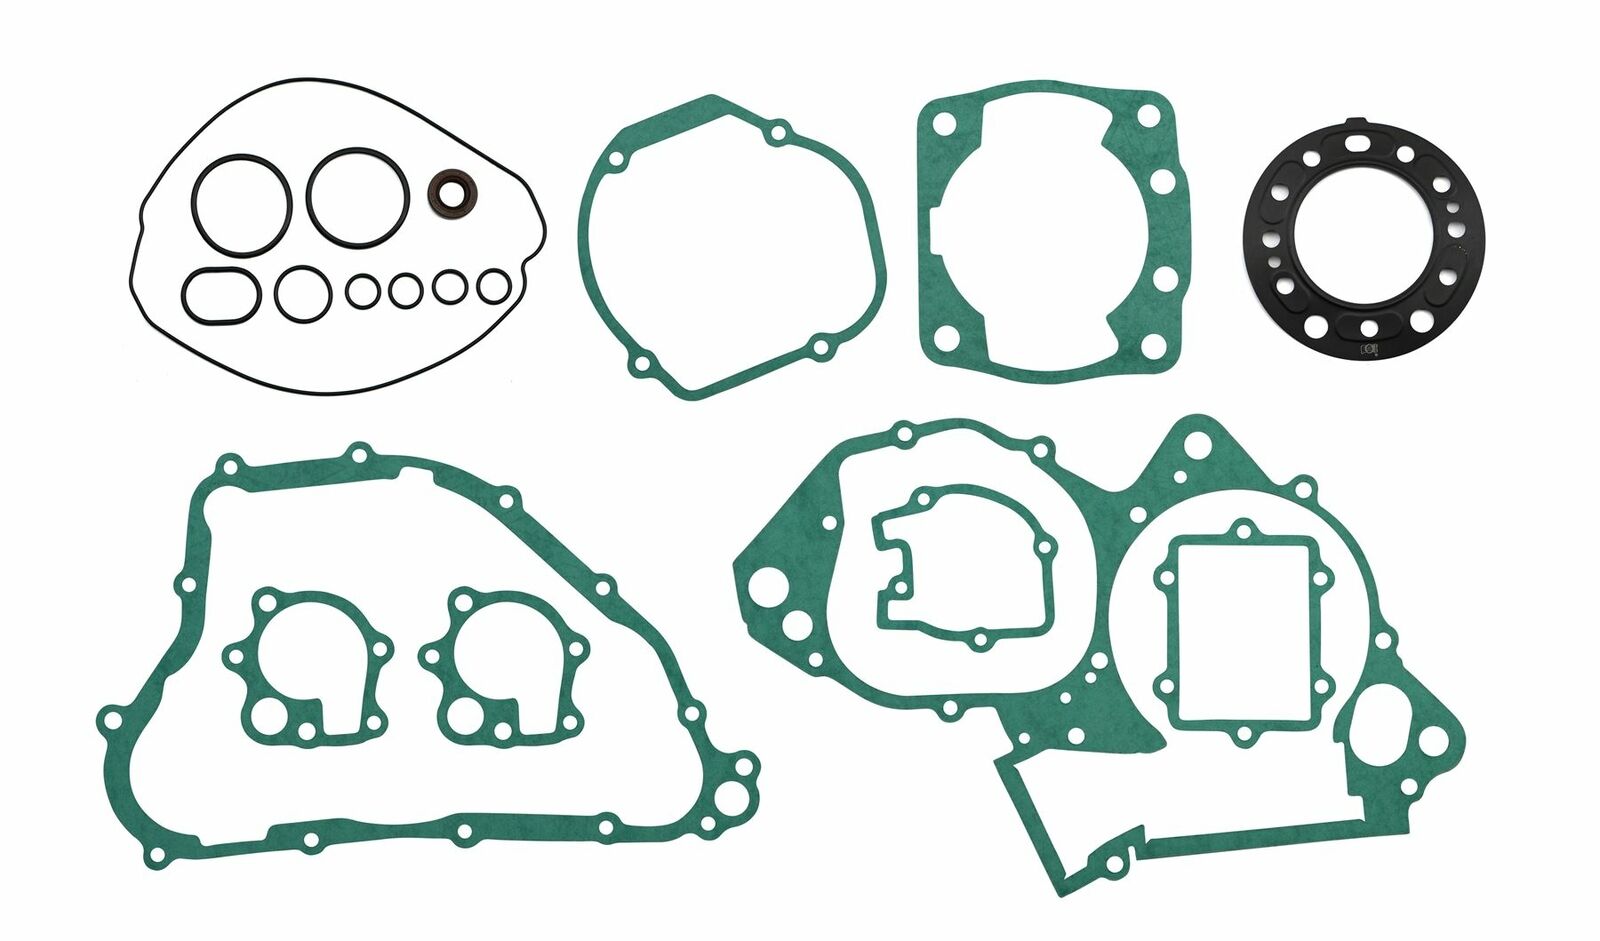 Full Gasket Set Rapid rise Fits CR250R2-R3 Limited time for free shipping 2002-2003 Honda